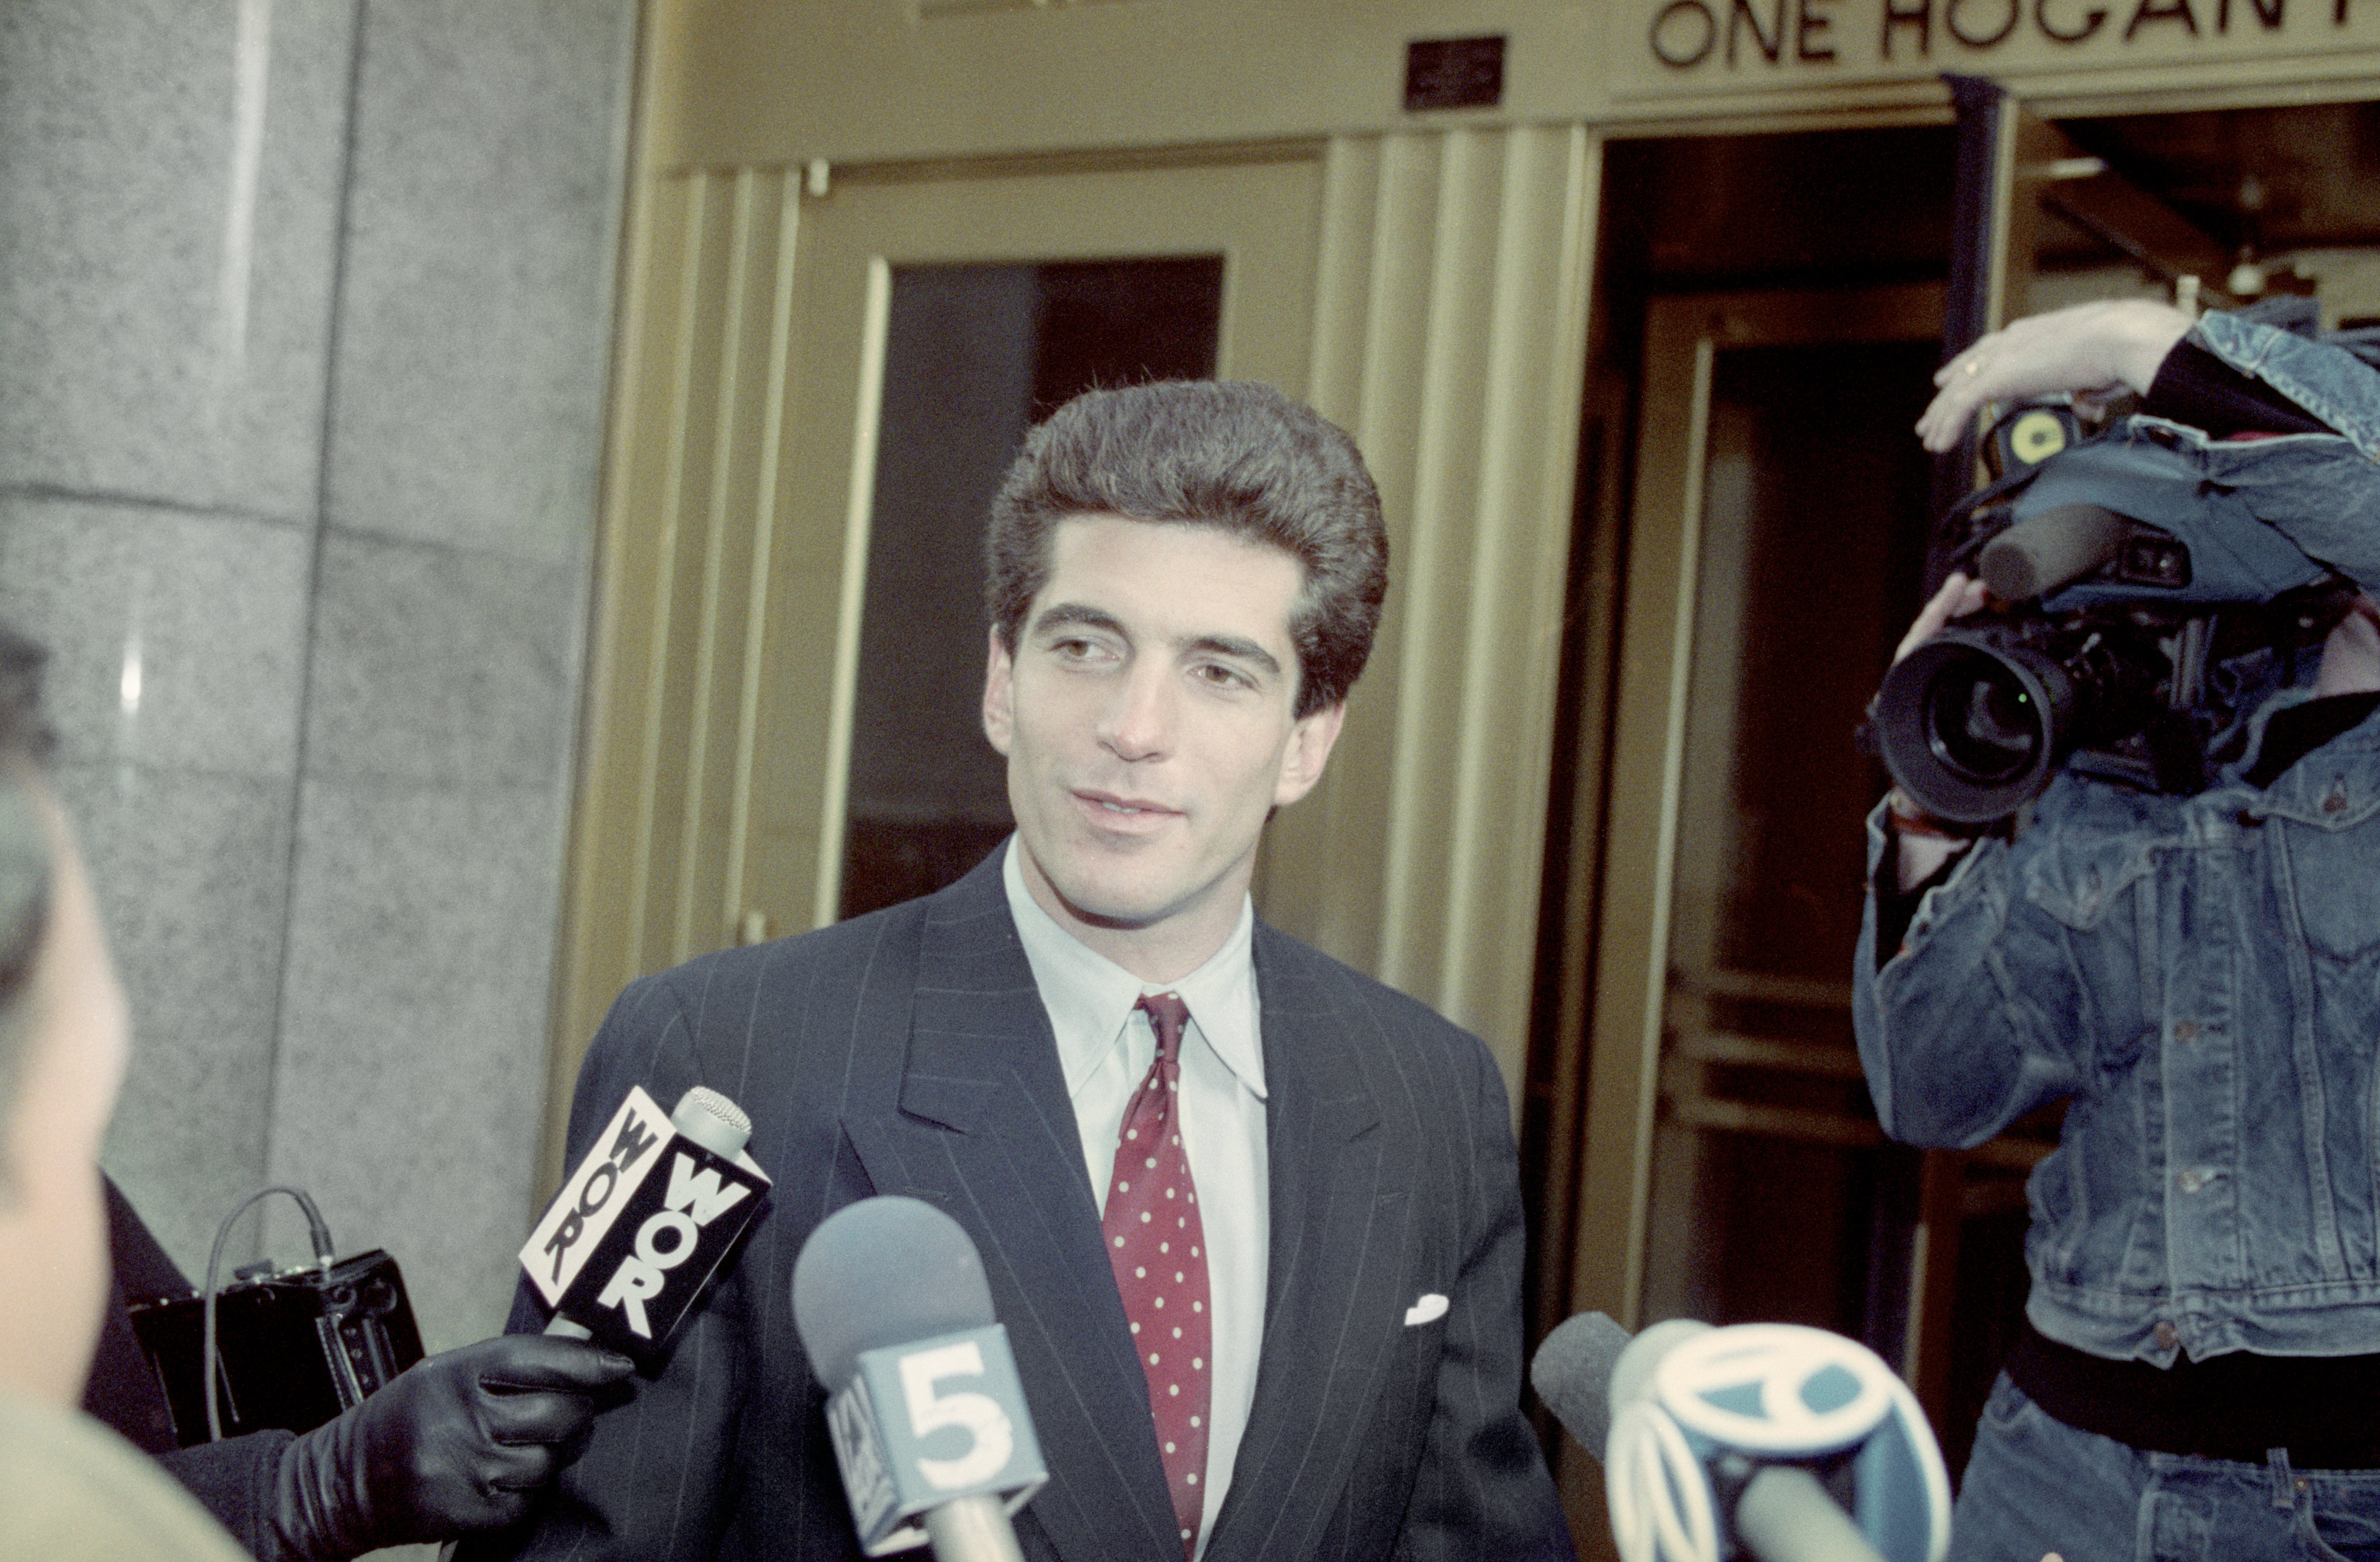 John F. Kennedy Jr. talks to reporters about passing the New York Bar examination | Photo: Getty Images